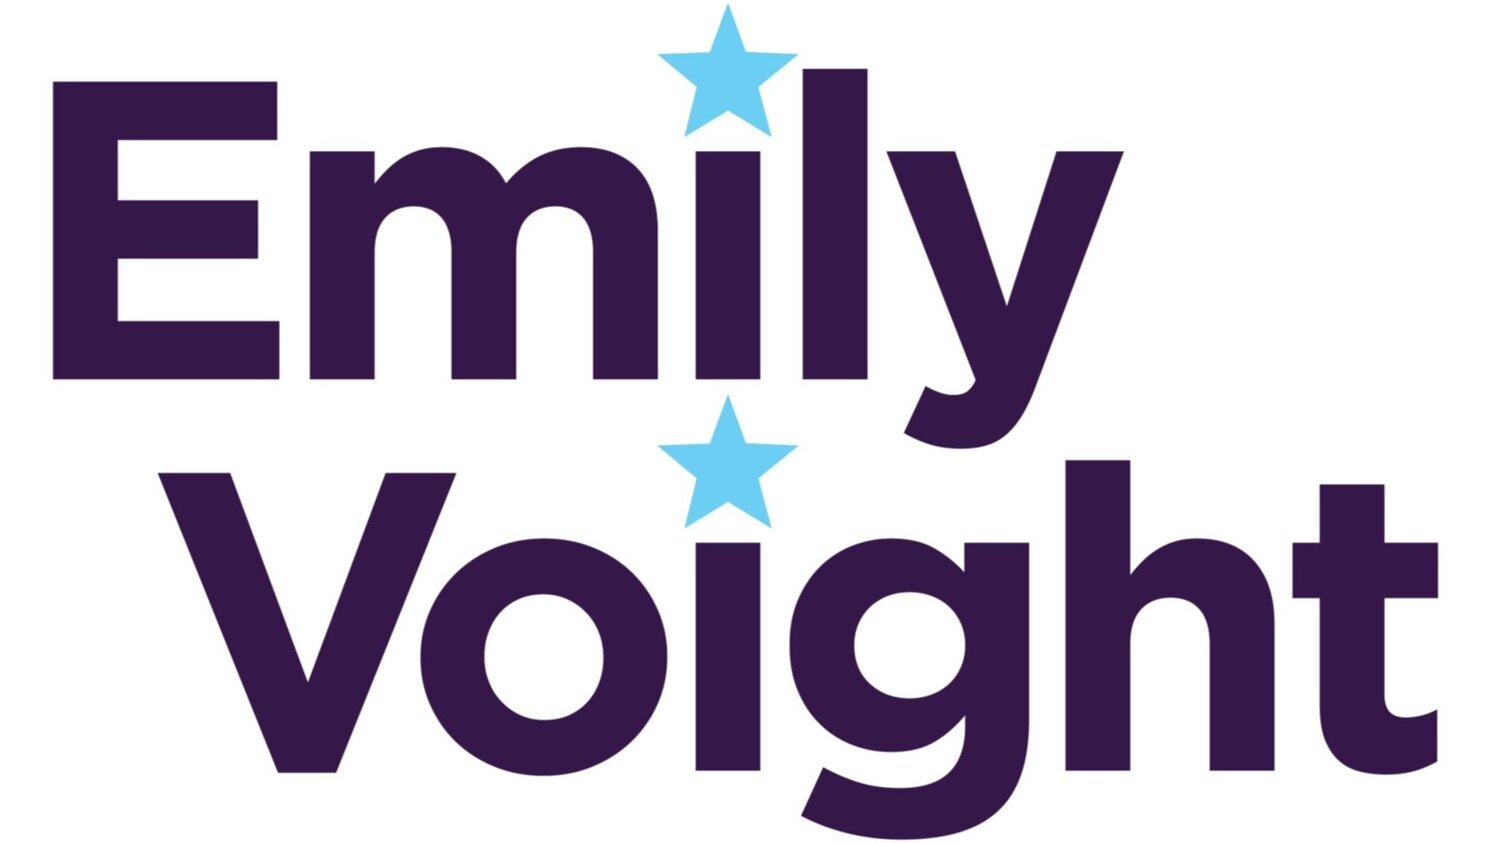 Emily Voight for State Assembly